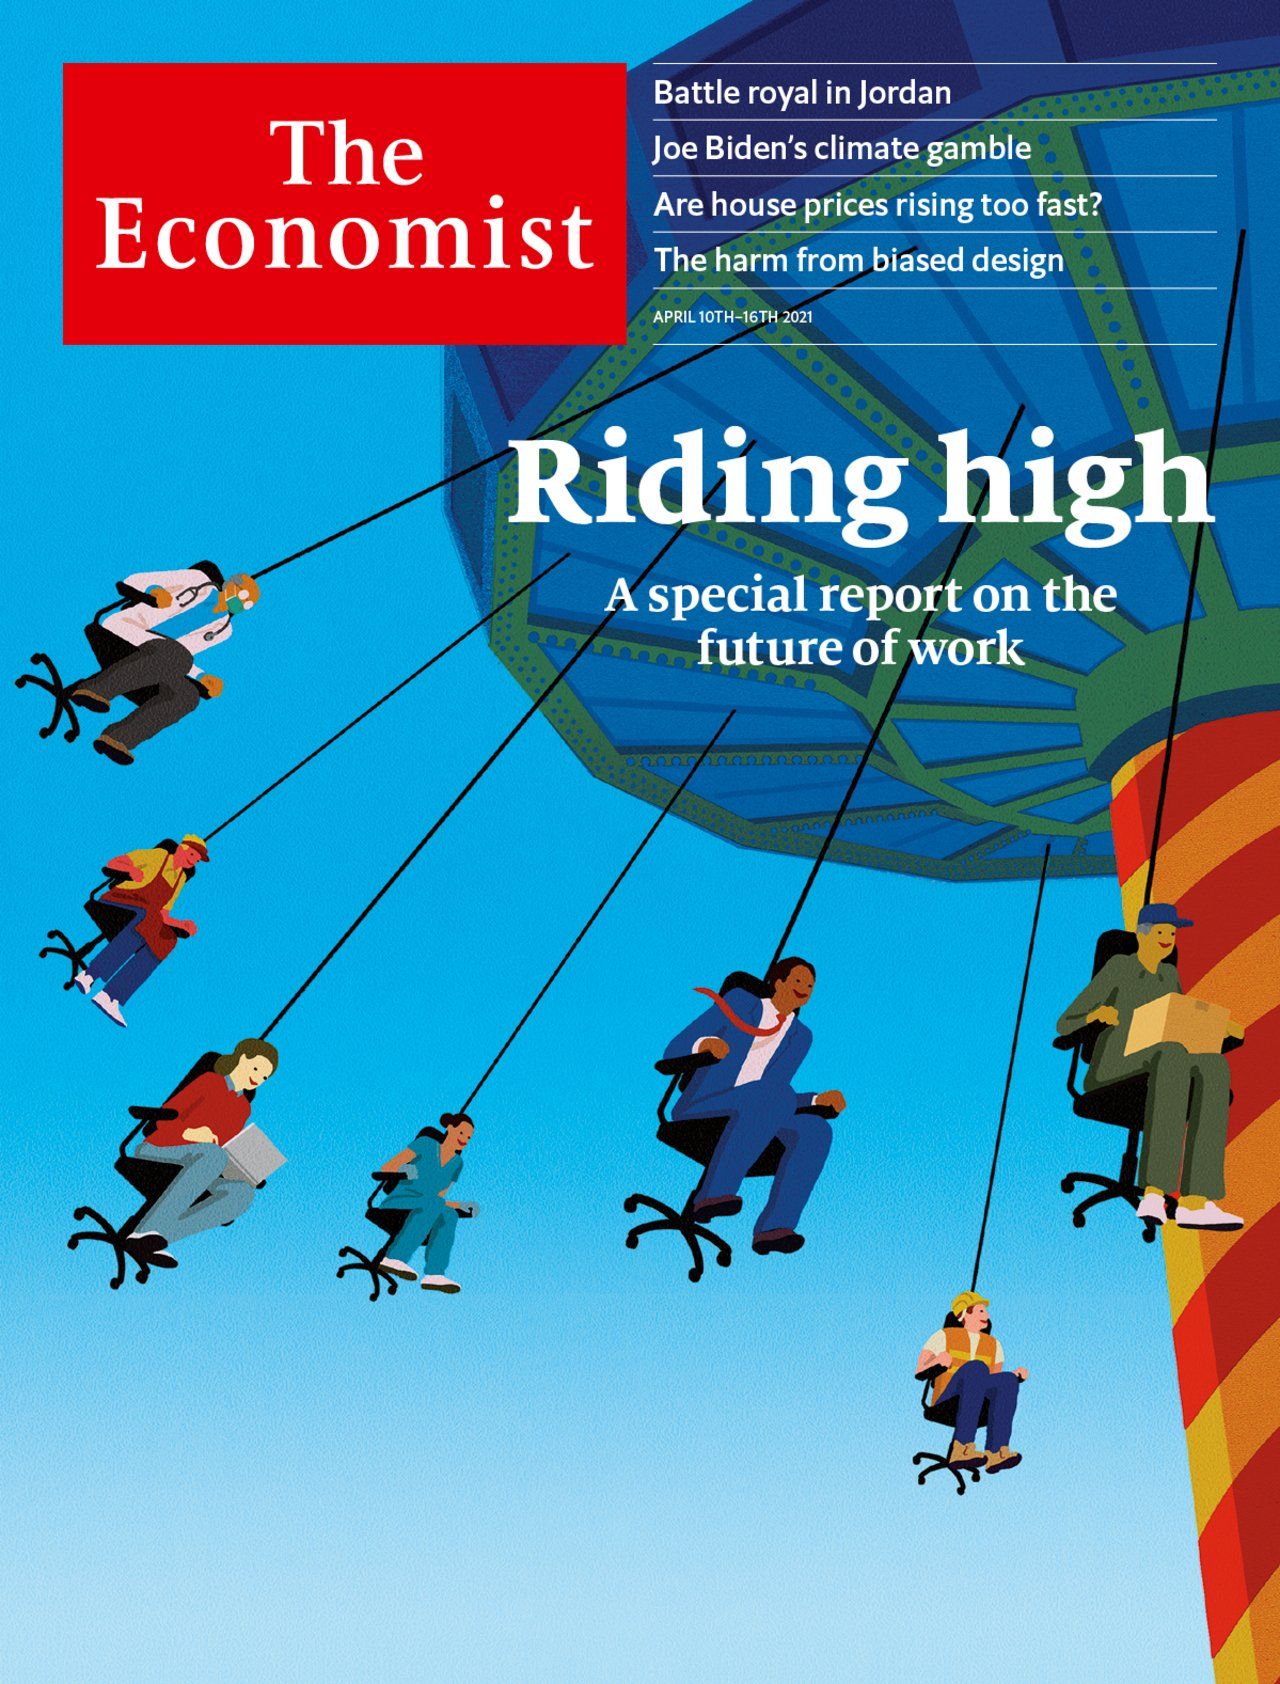 Riding high: A special report on the future of work